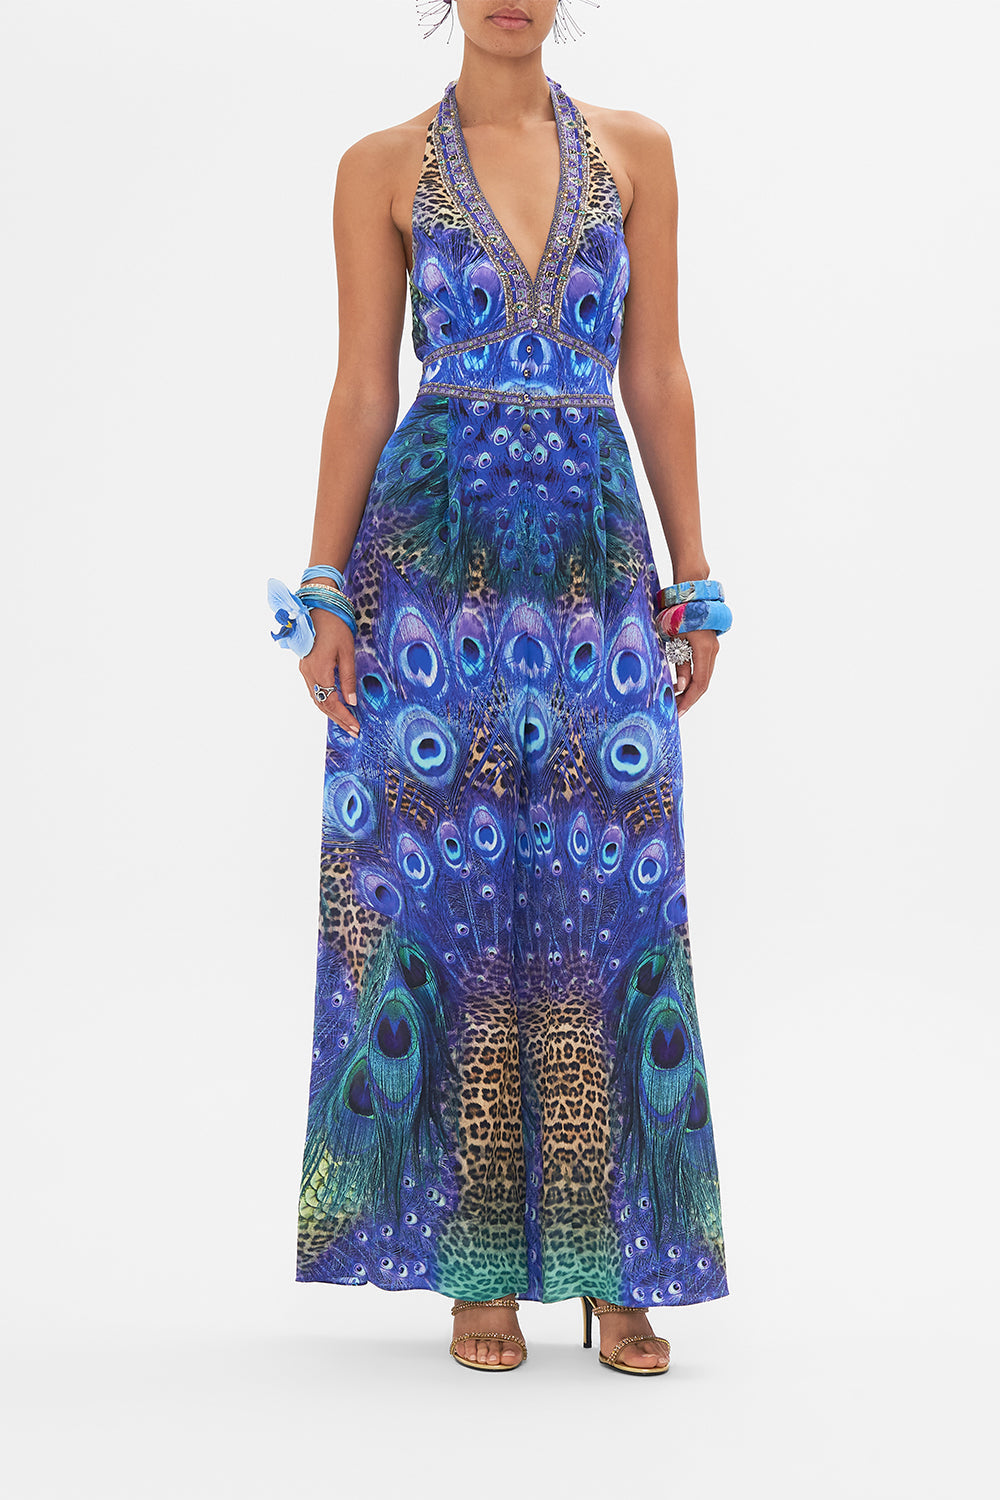 Front view of model wearing CAMILLA silk jumpsuit in Peacock Rock print